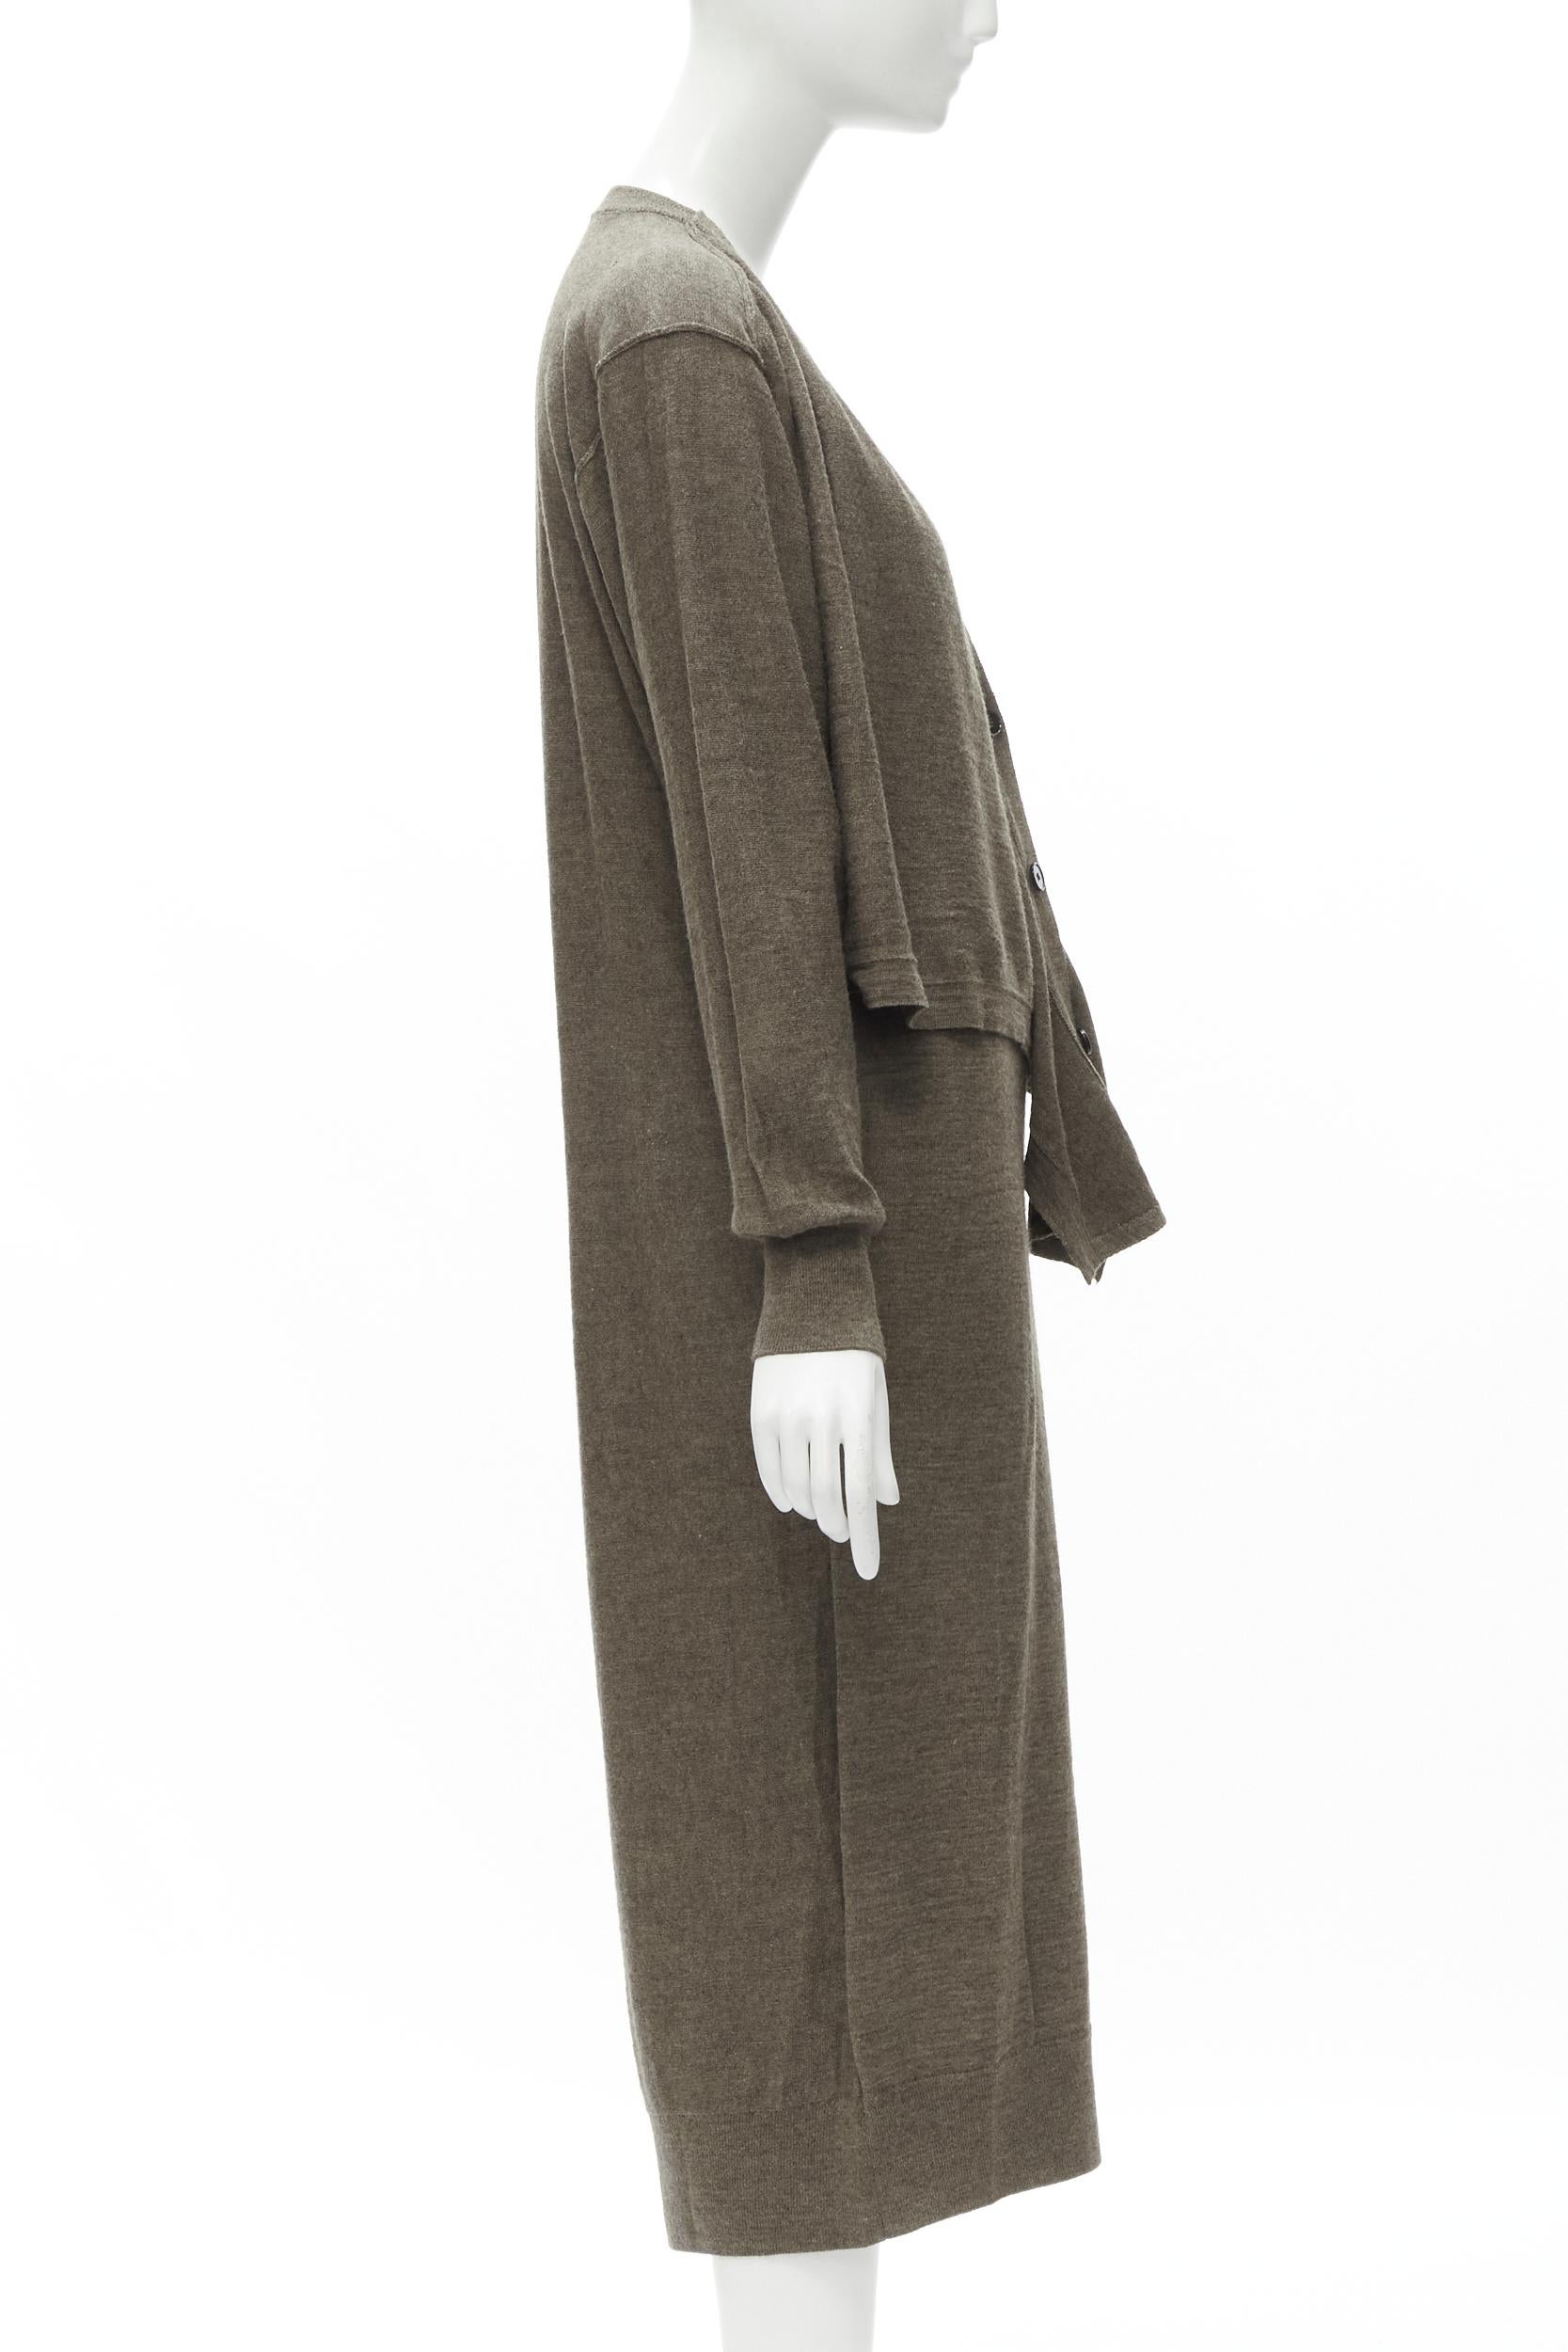 LEMAIRE brown merino wool blend tie front cardigan sweater dress XS In Excellent Condition For Sale In Hong Kong, NT